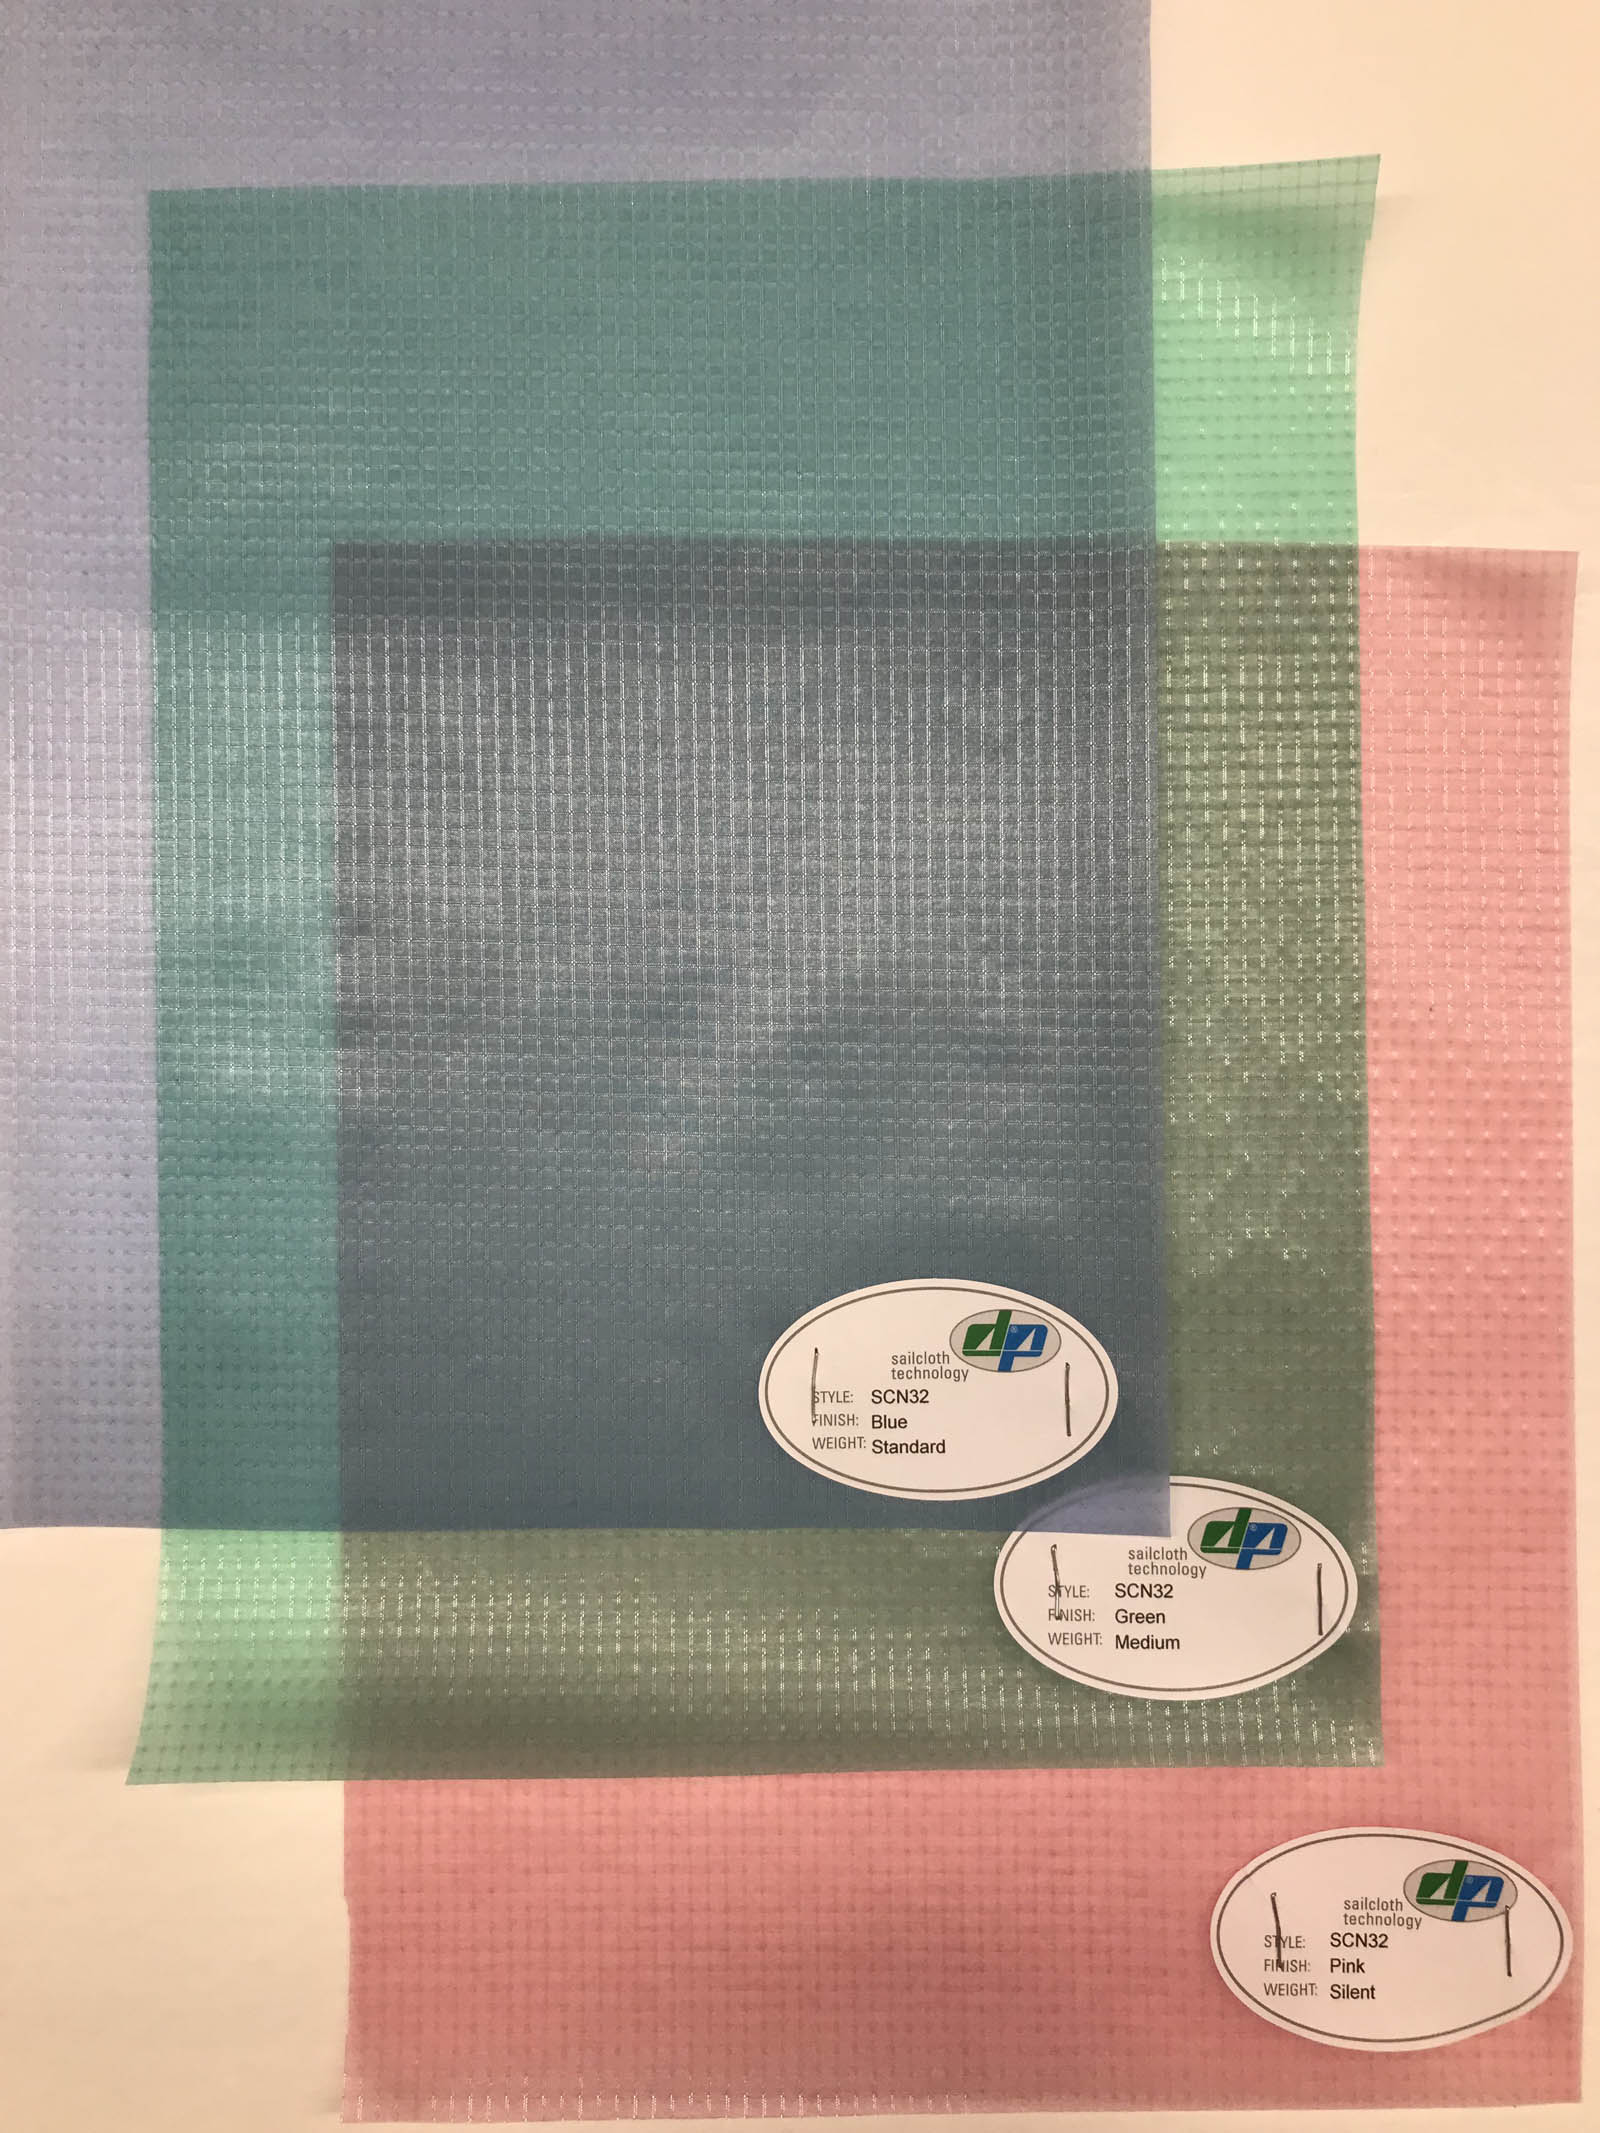 DP Low-Friction Medical Fabric Image